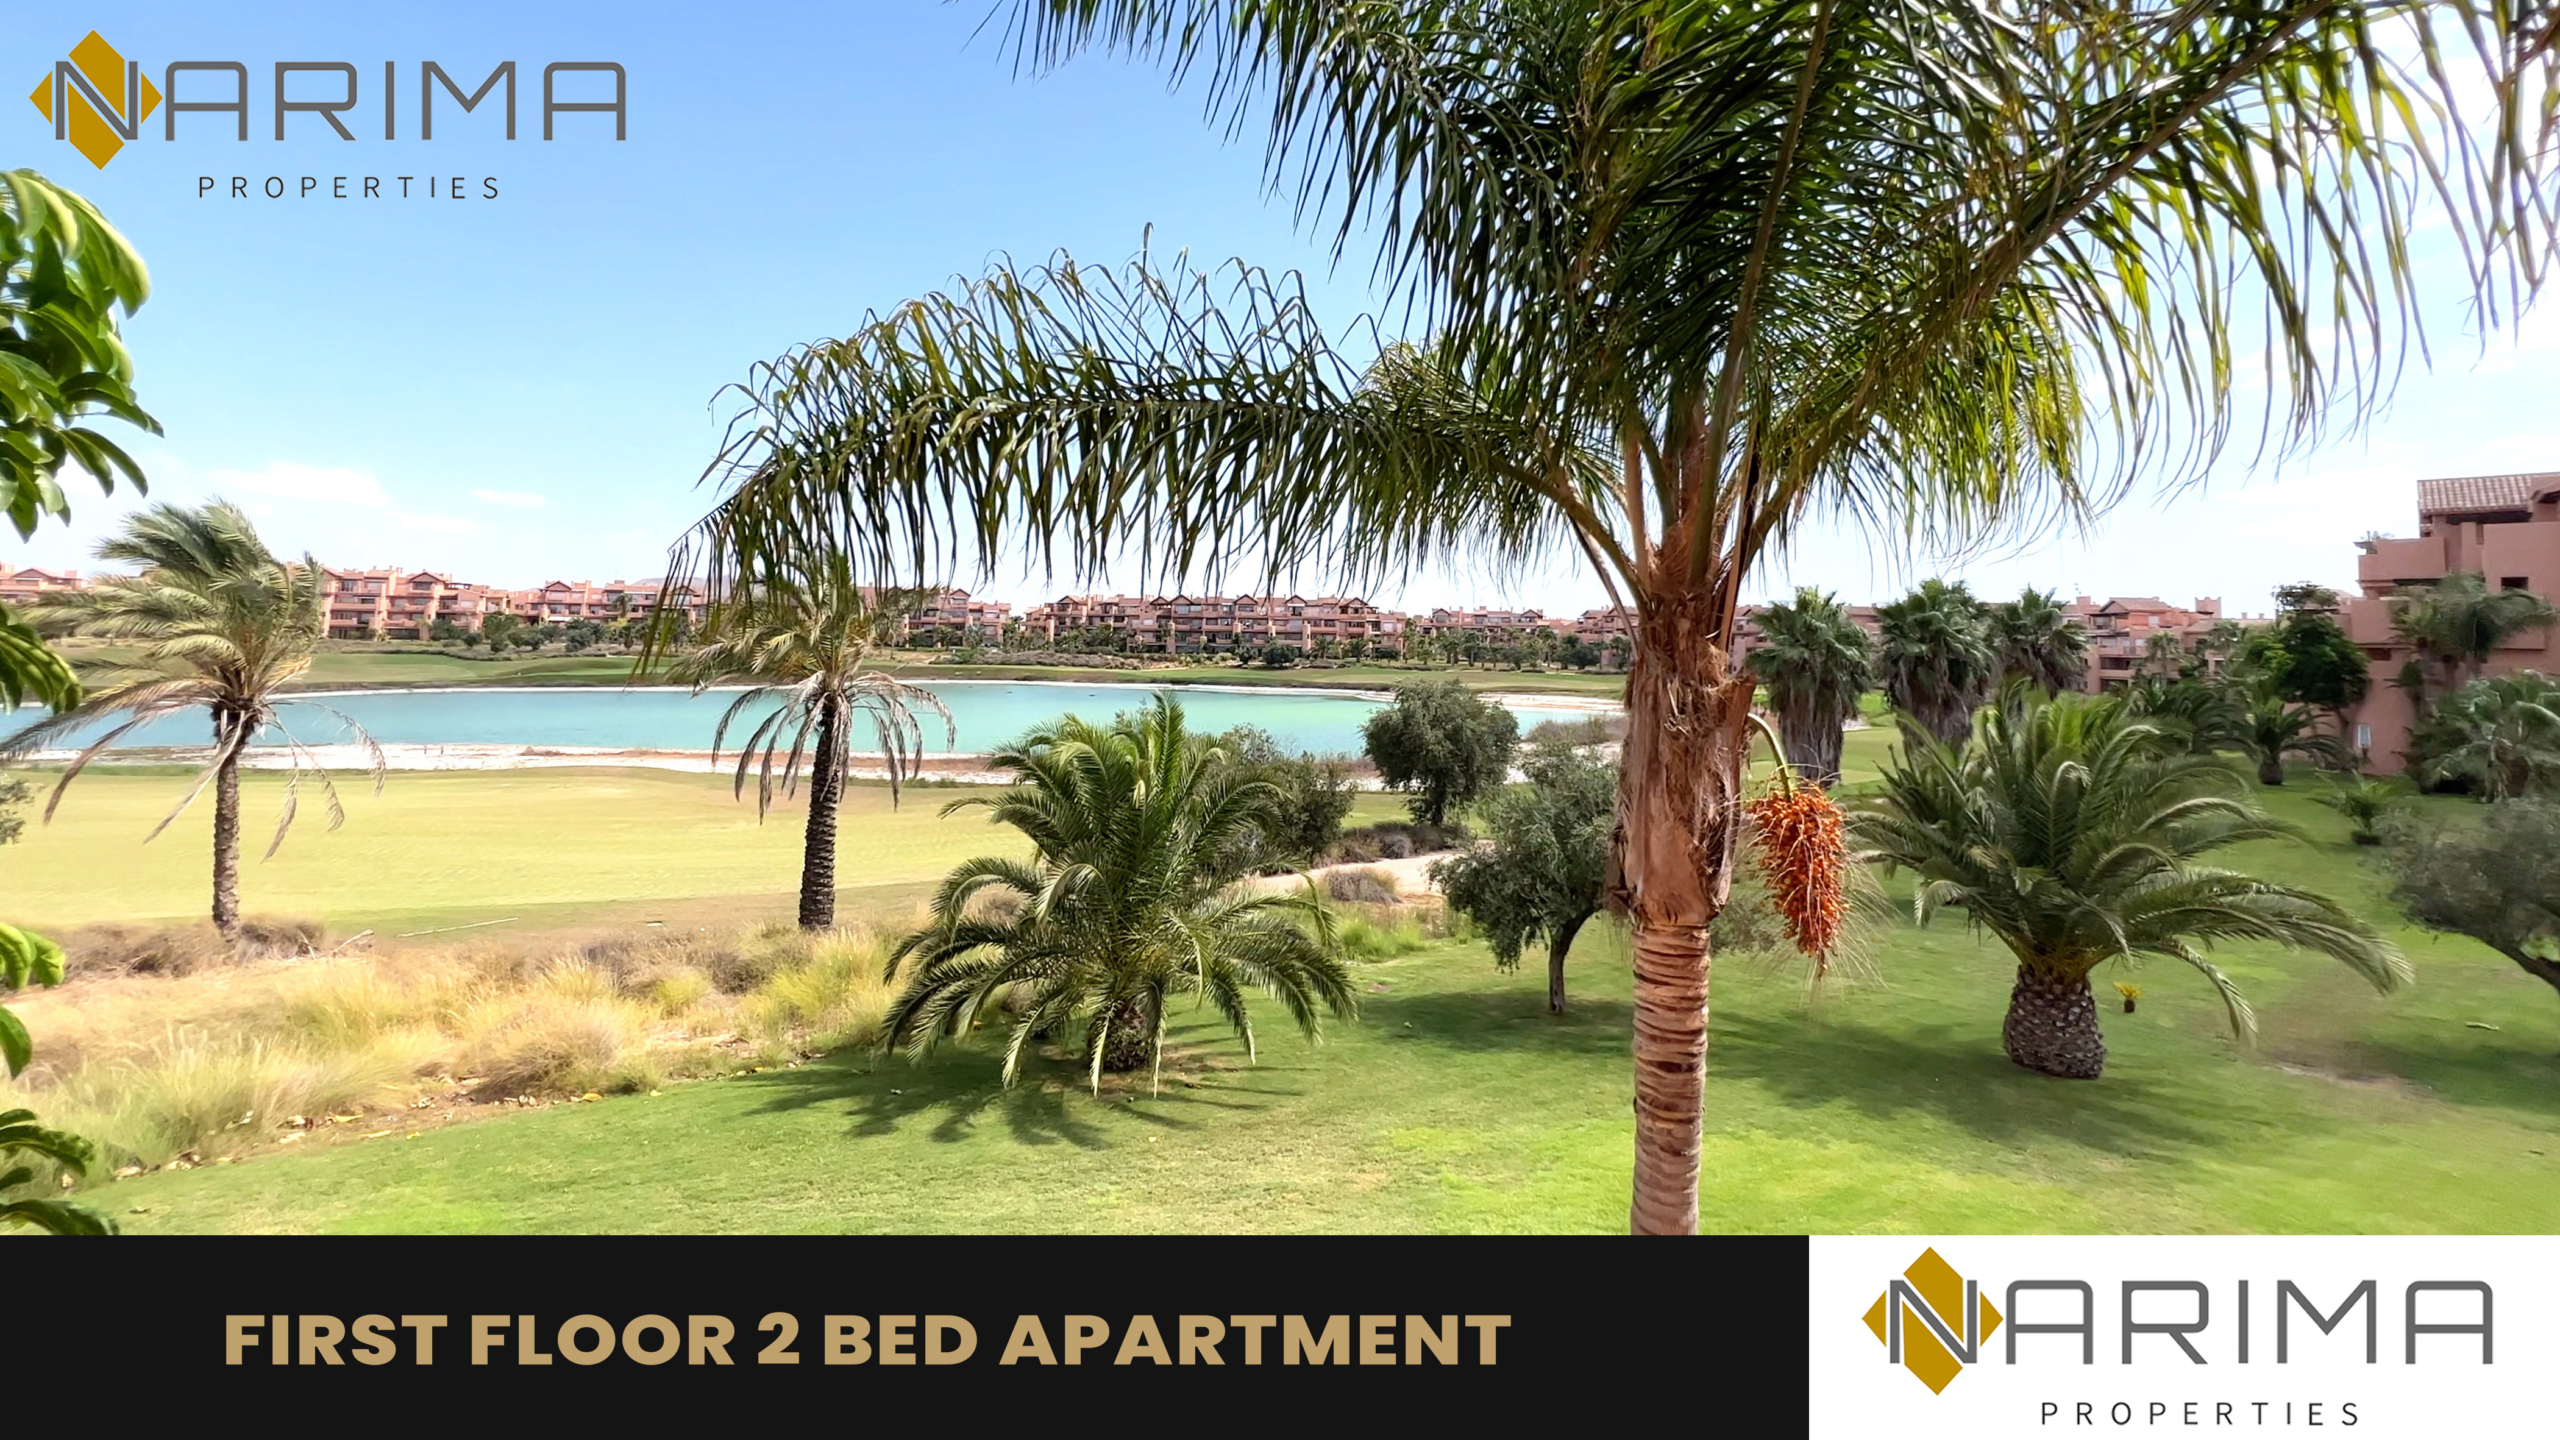 First Floor 2 bed fully furnished Apartment for sale - Marr Menor Golf Resort